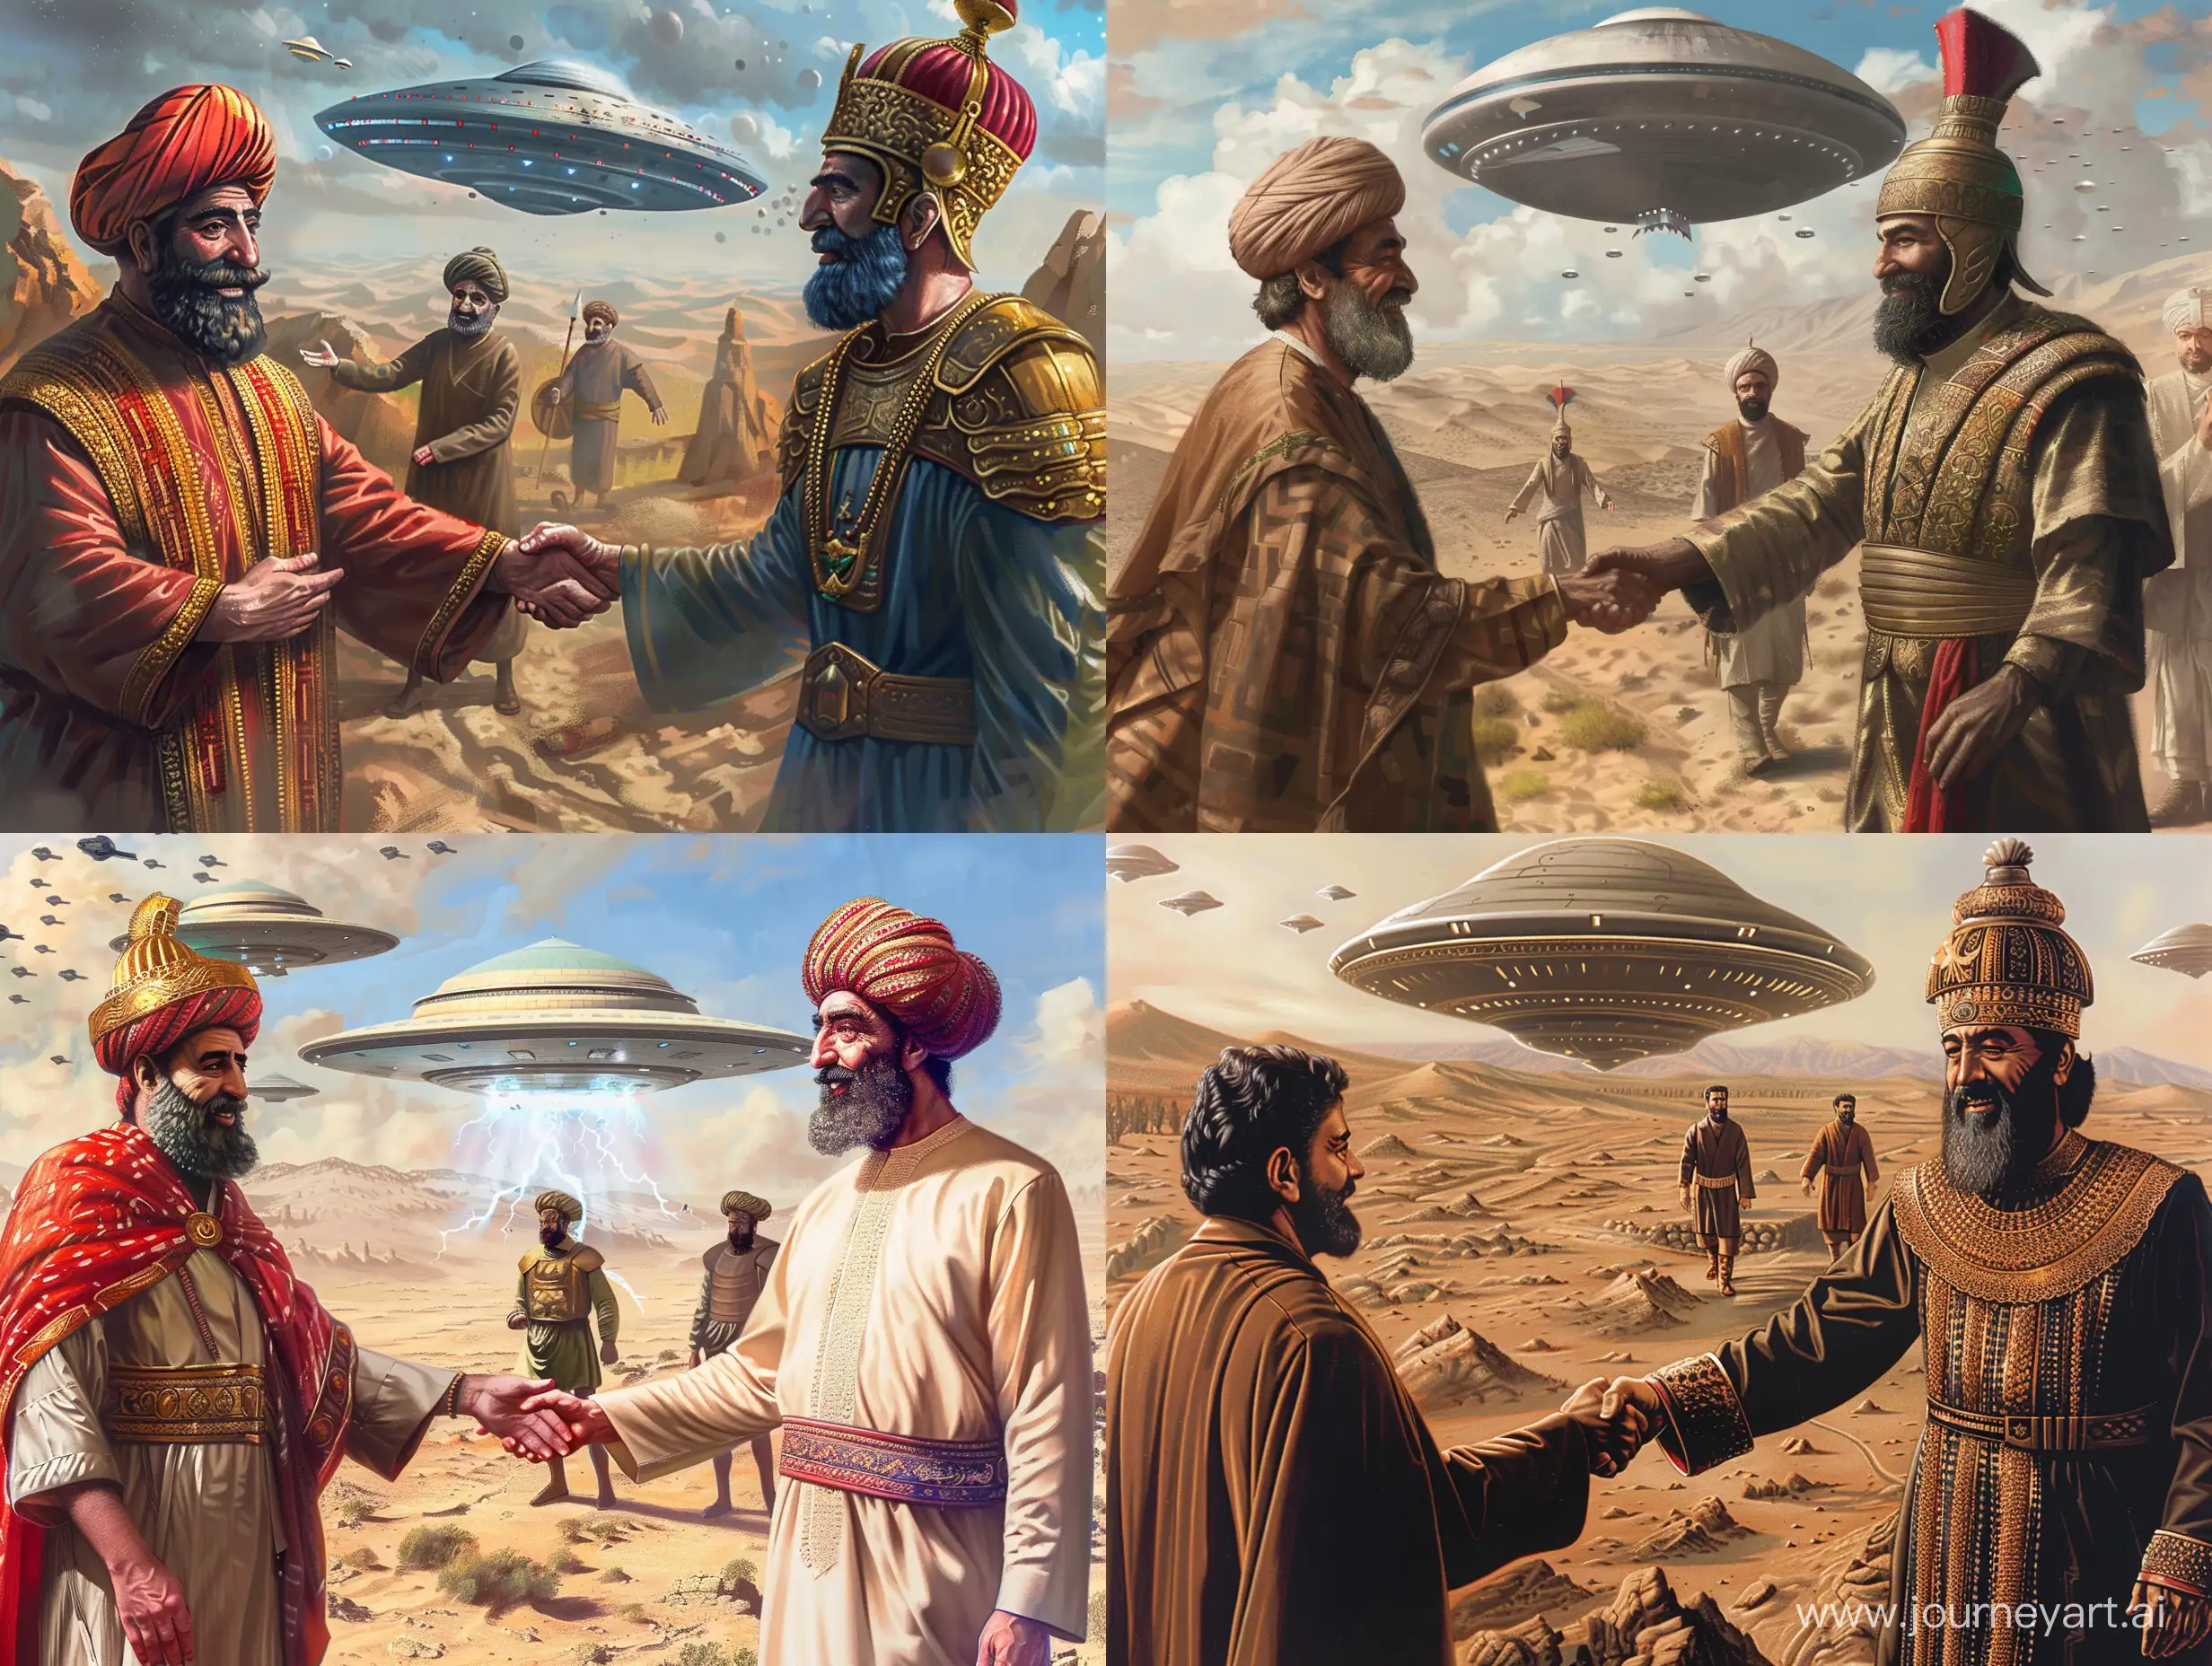 cyrus the great achaemenid empire is shaking Nader Shah Afshar hands and both are smiling, in a desert,lofi,ufos are in  background is trying to flying to space,an achaemenid  immortal soldier is standing further than them and look at them,--q2,--ar7:4